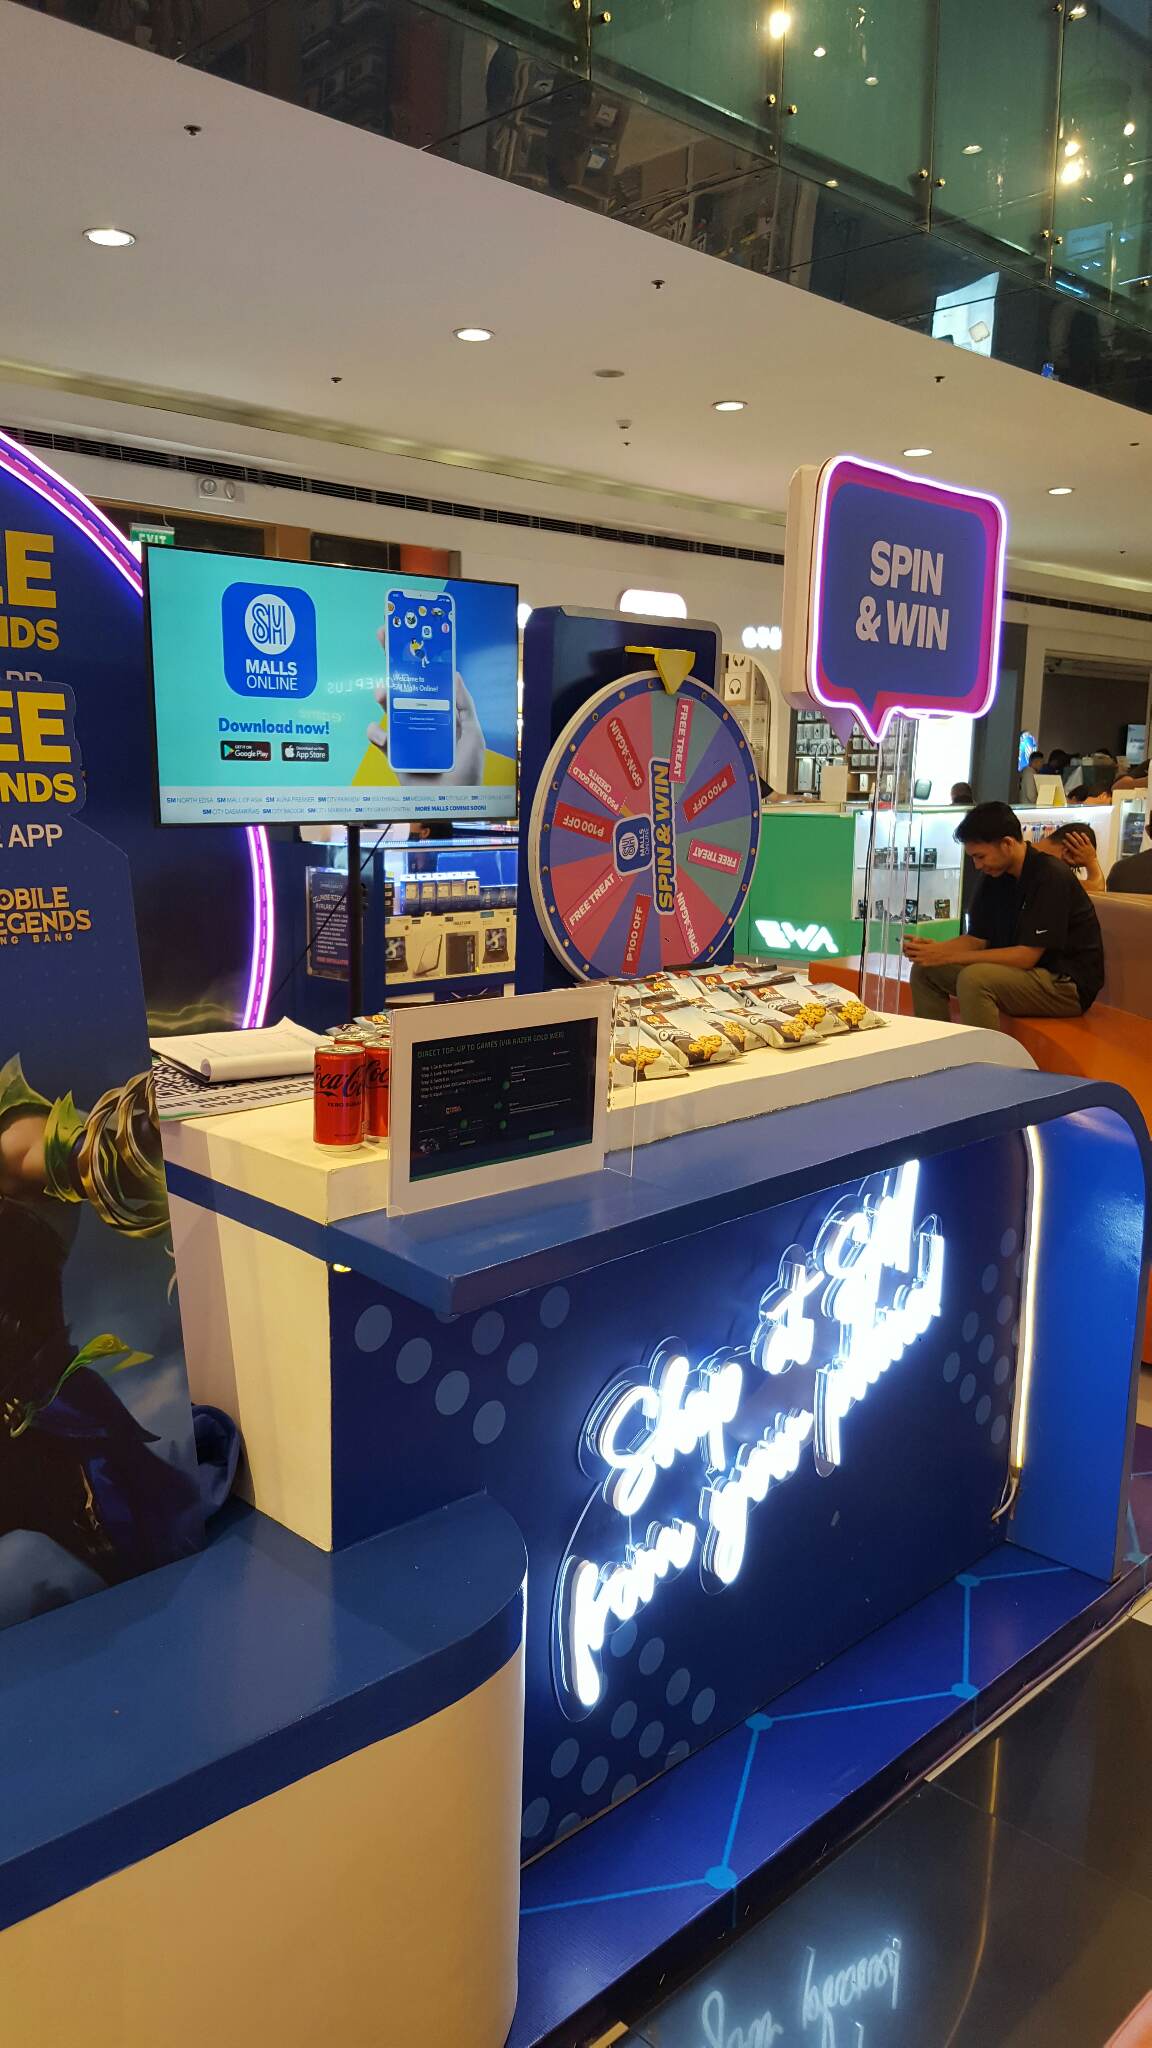 SM Supermalls hosts the biggest gaming activation in 60 malls nationwide